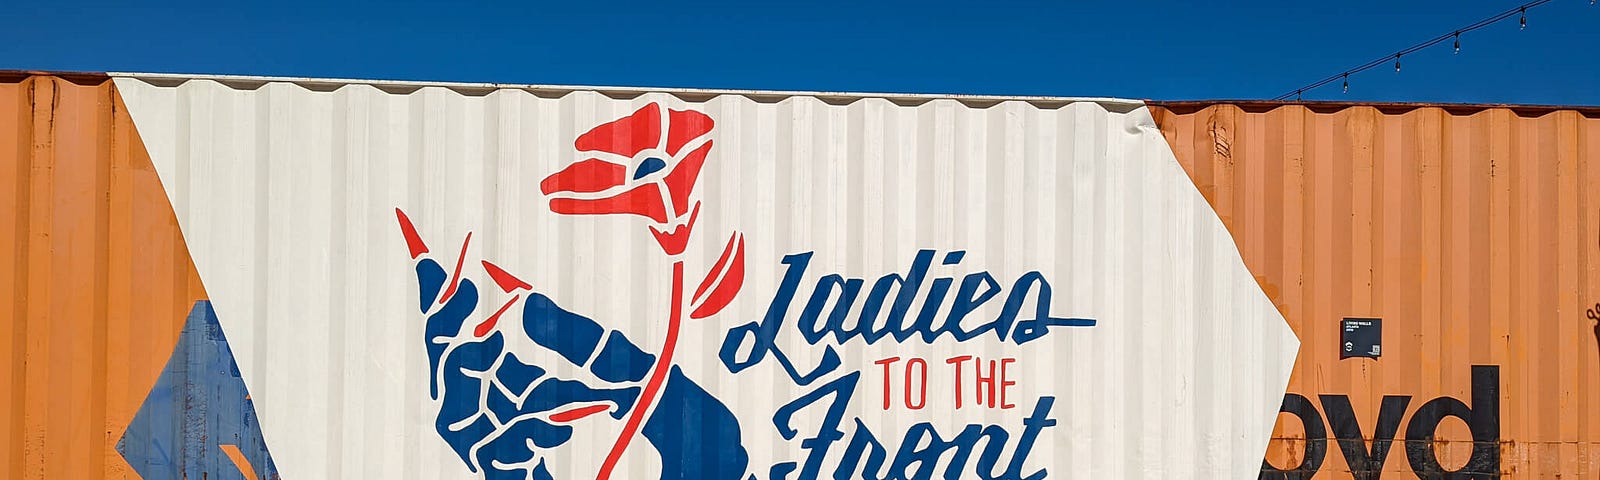 A shipping container painted with a large mural showing a hand holding a poppy flower and the slogan “Ladies to the Front”